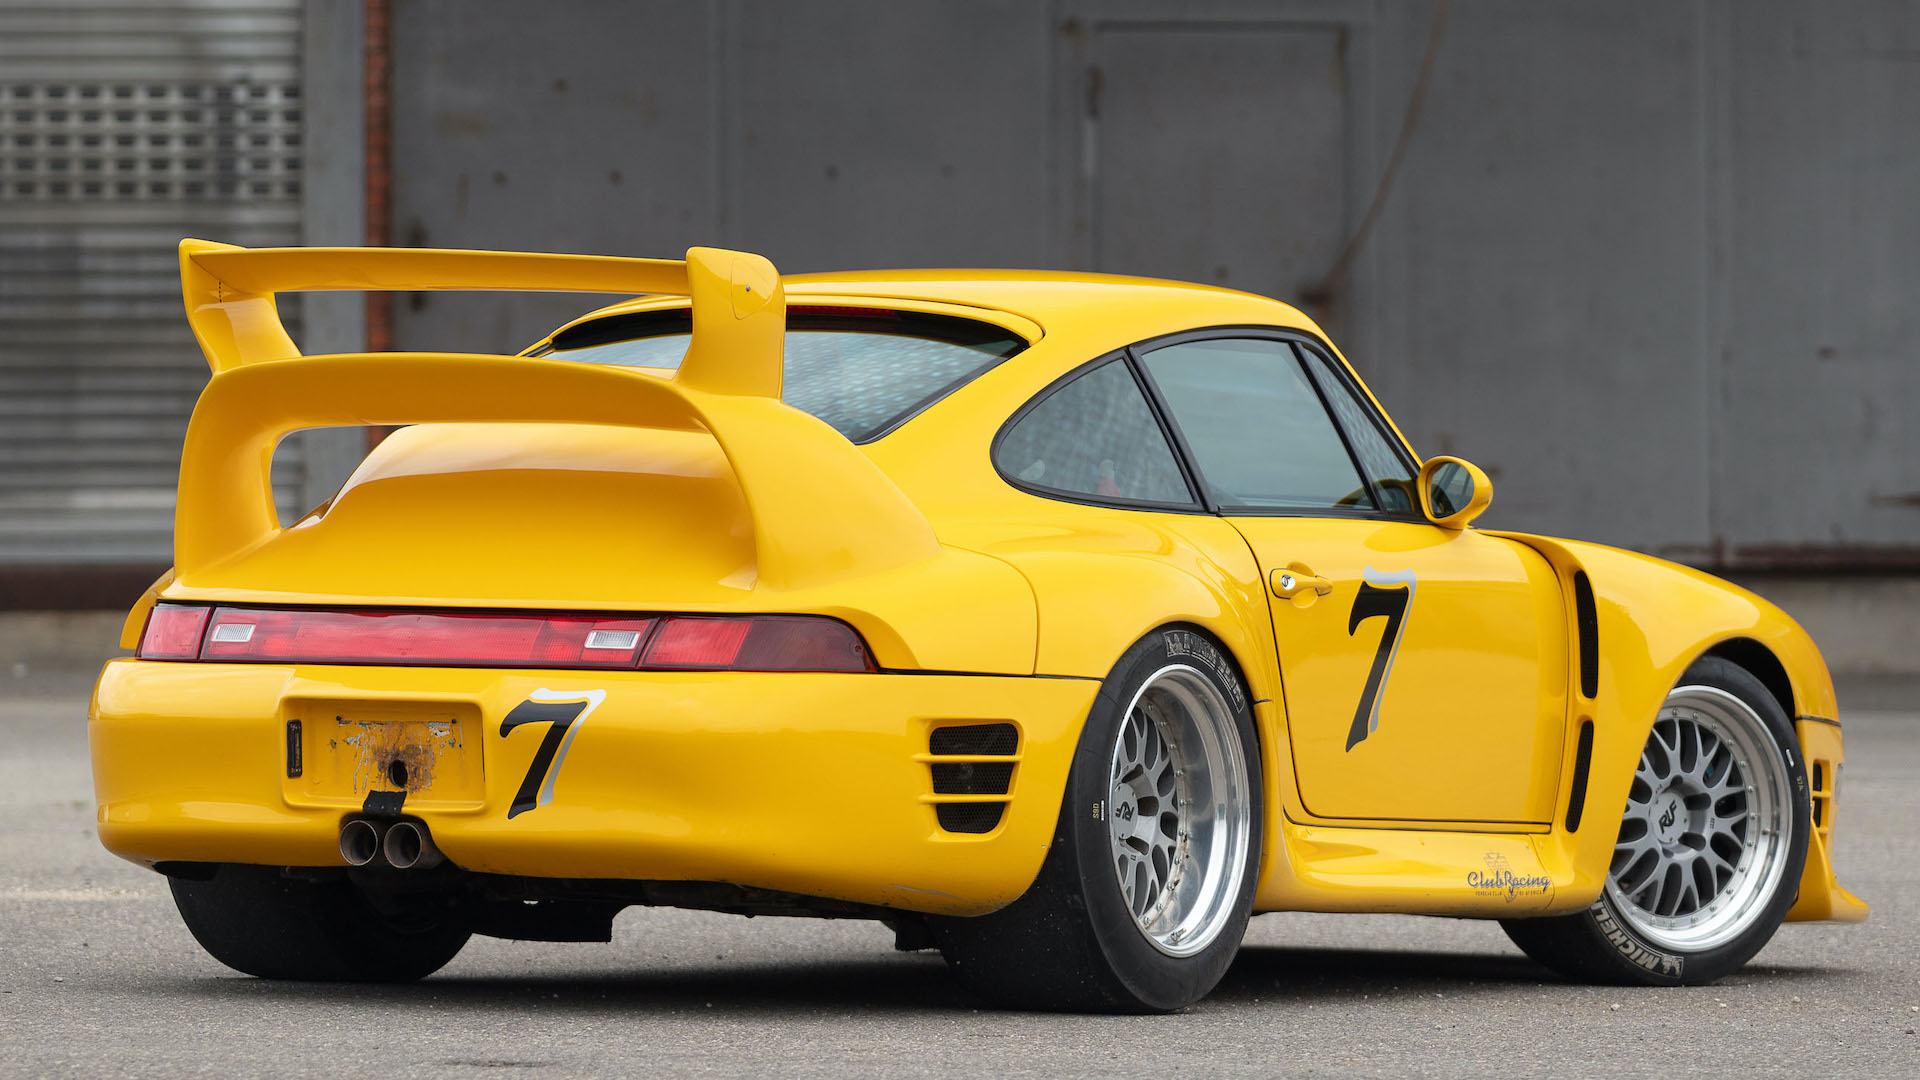 Rare 1997 RUF CTR2 Sport With Mythical Backstory Is About to Sell 